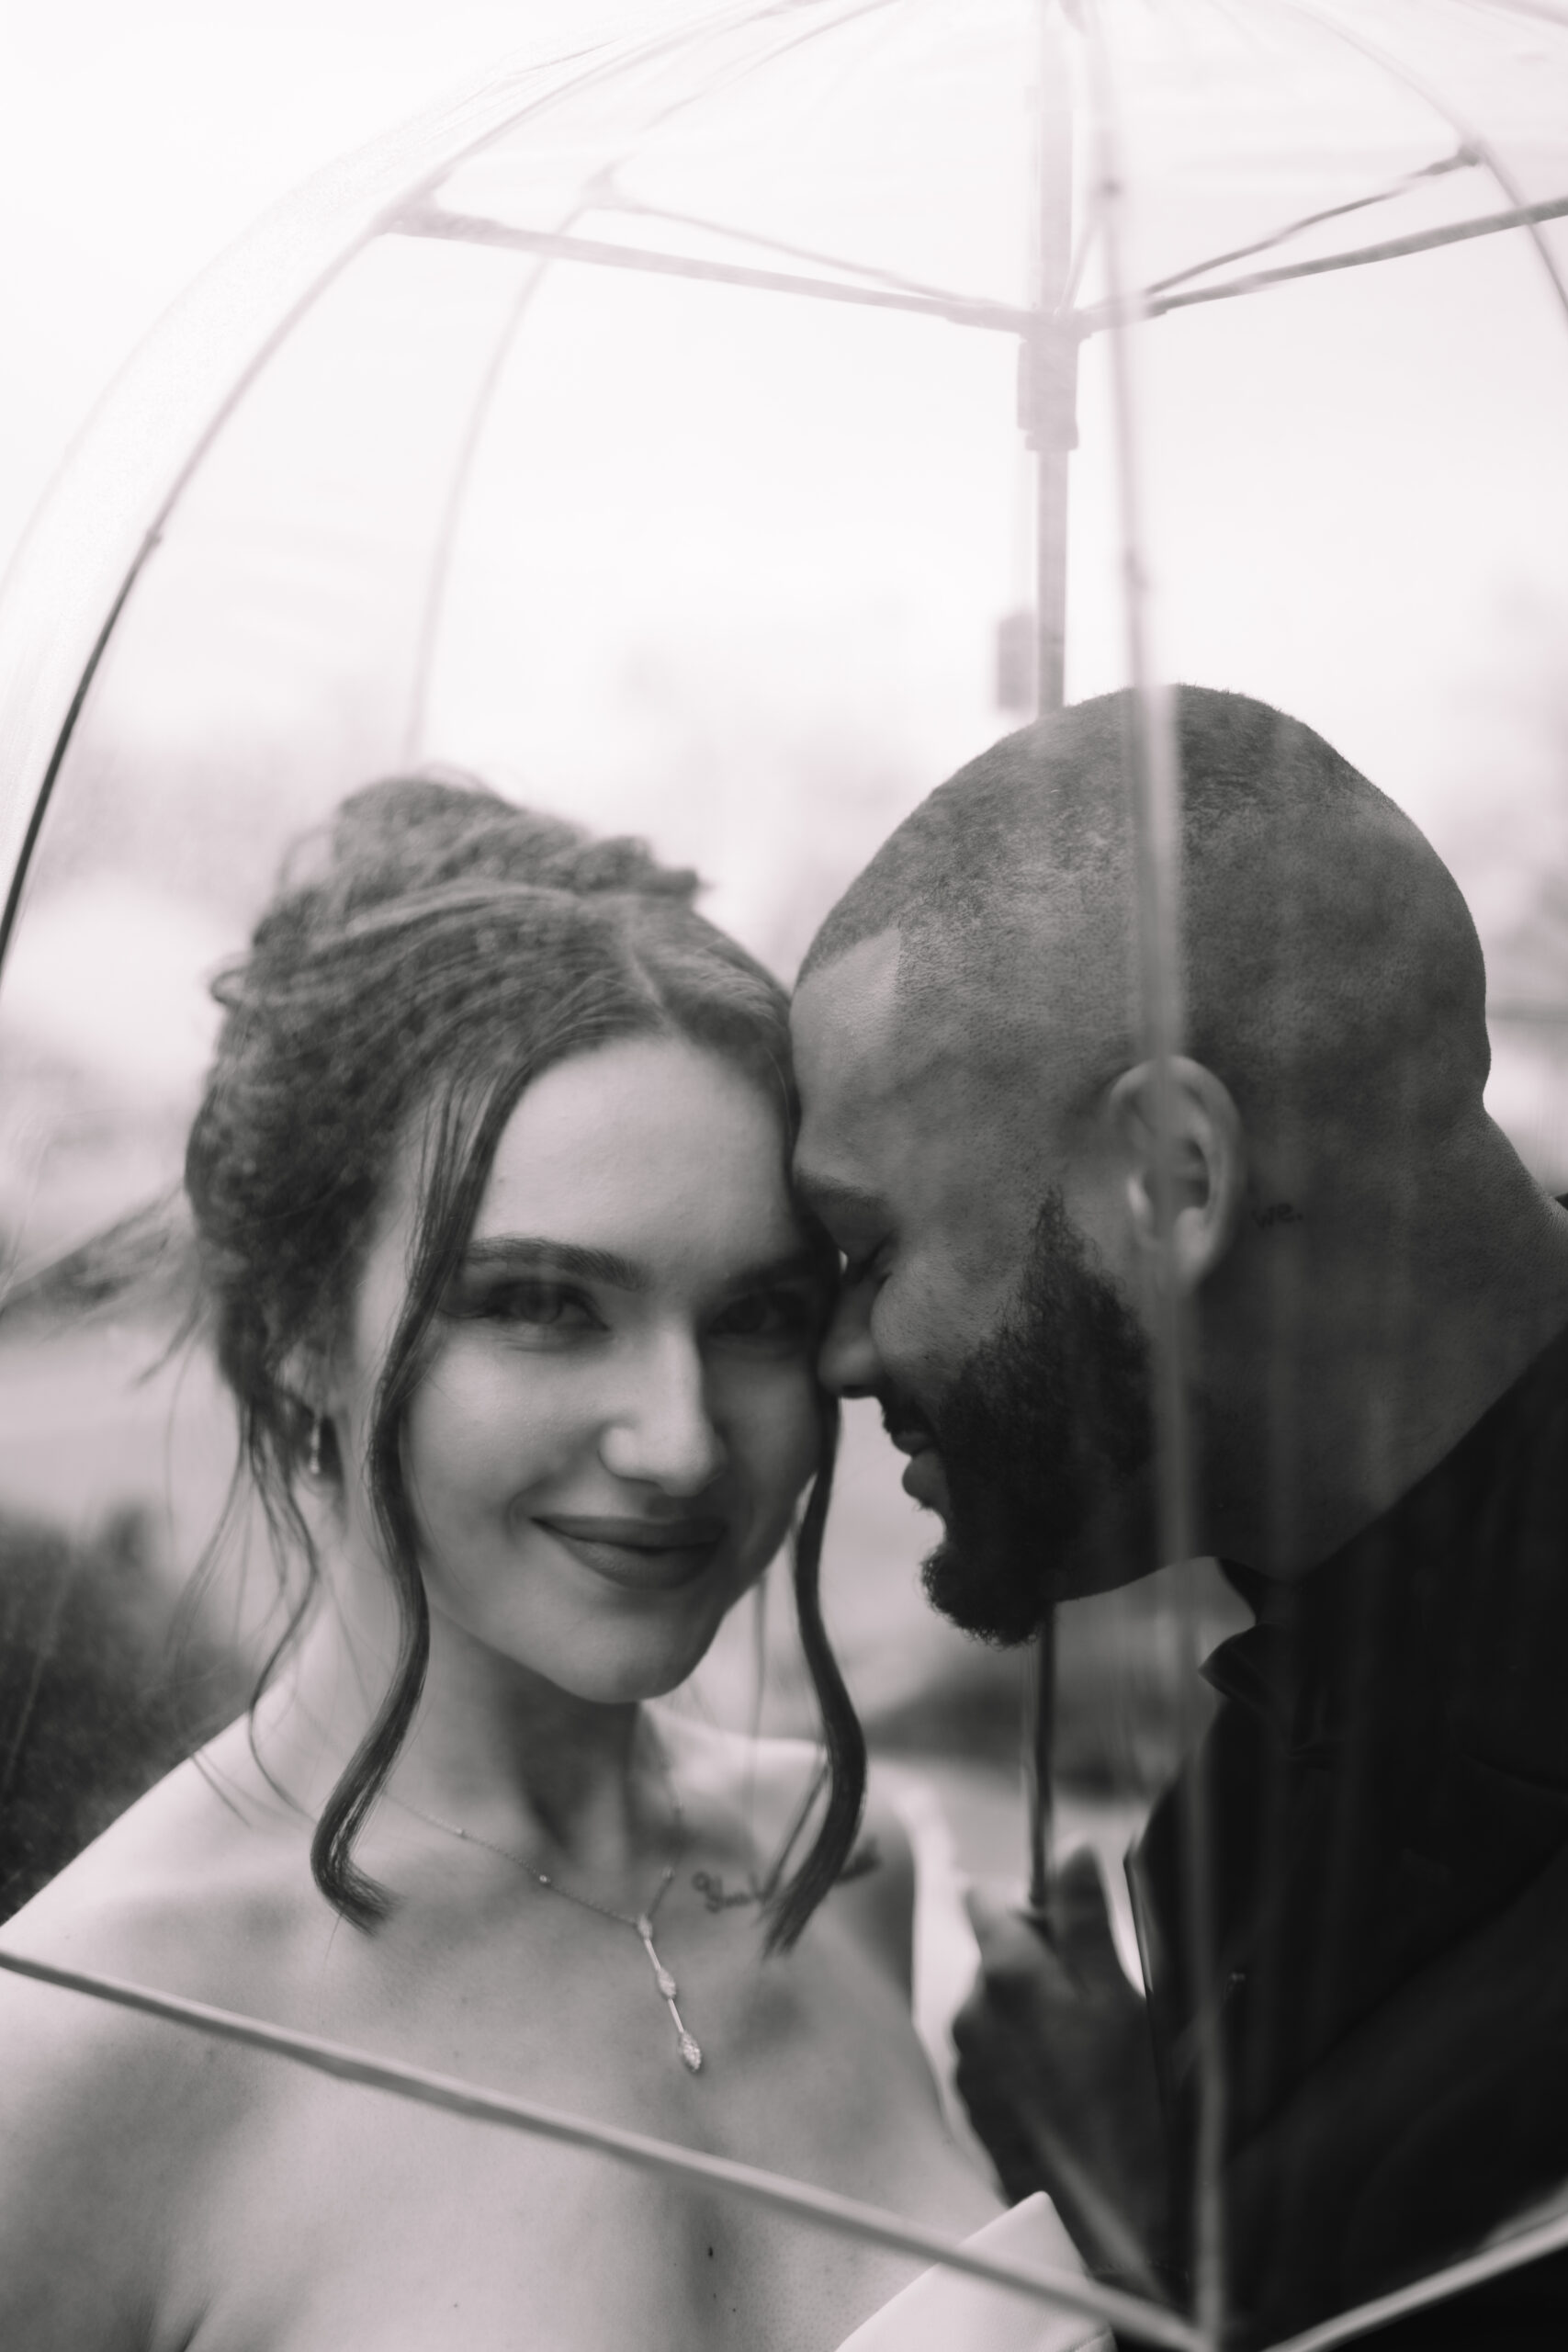 Close up wedding shot of Bride and groom standing underneath a clear umbrella with small rain droplets on, at the Machine Shop Wedding venue in Minneapolis